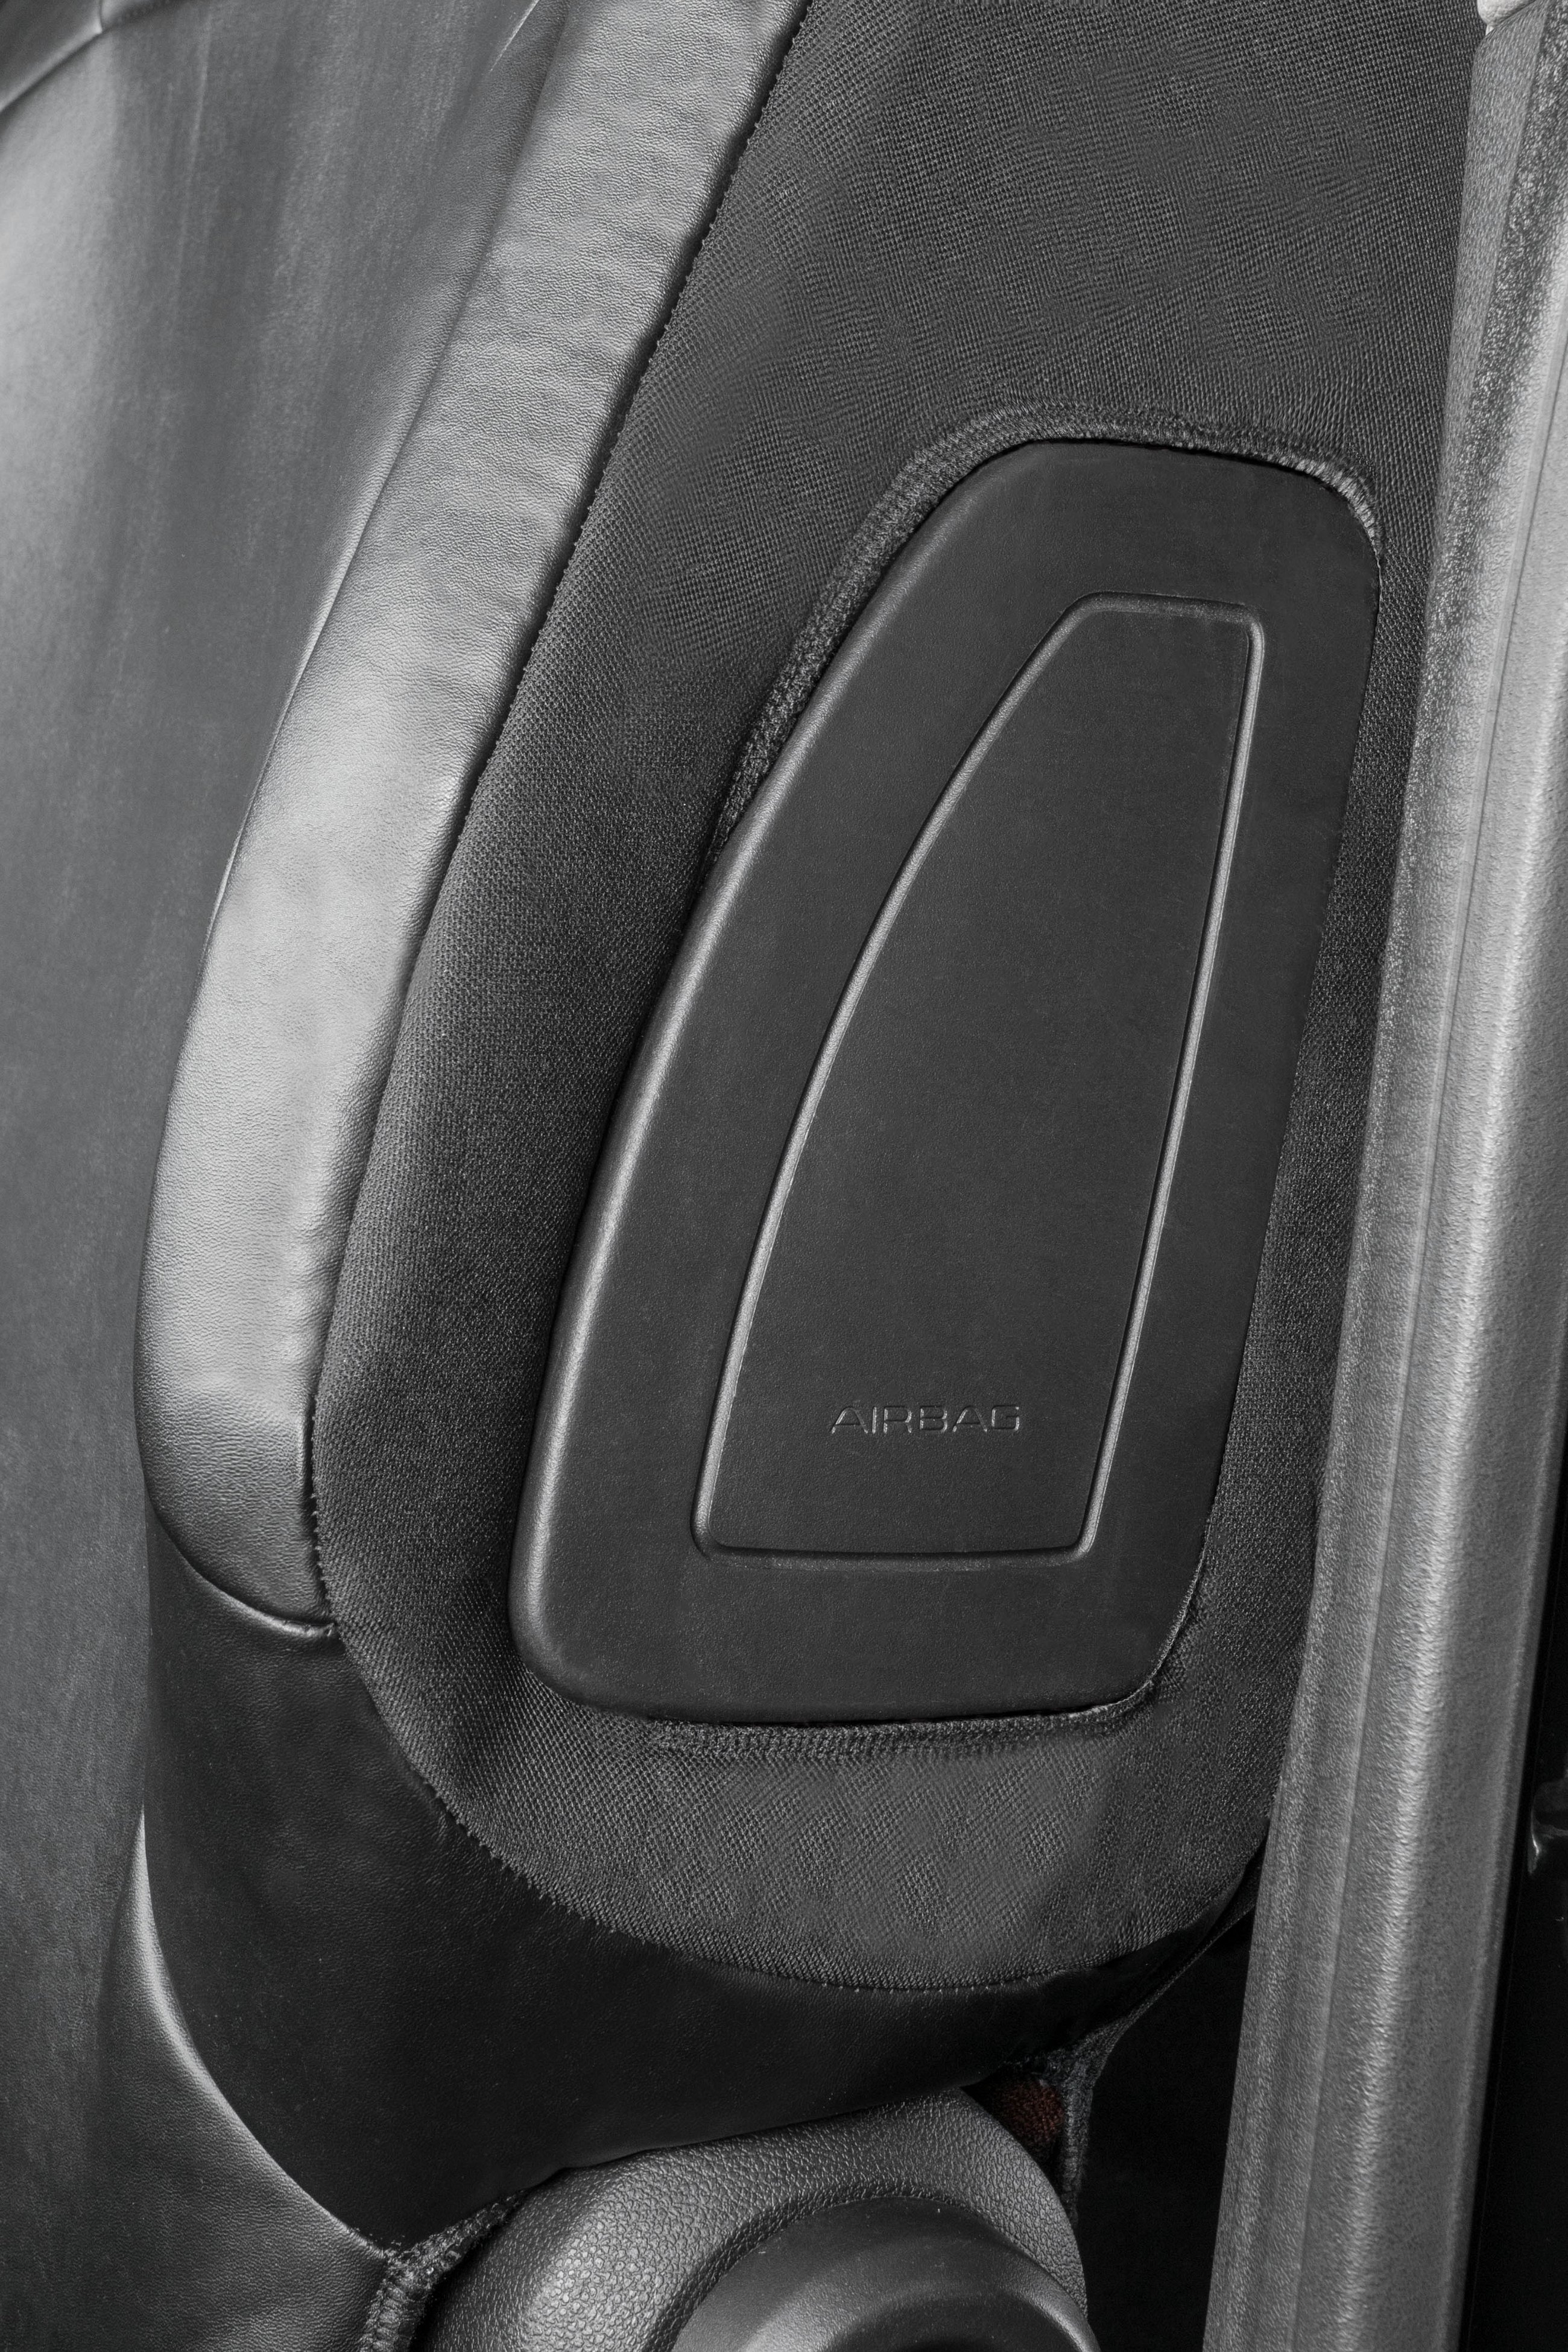 Seat cover made of imitation leather for Citroen Berlingo, 2 single seat covers front